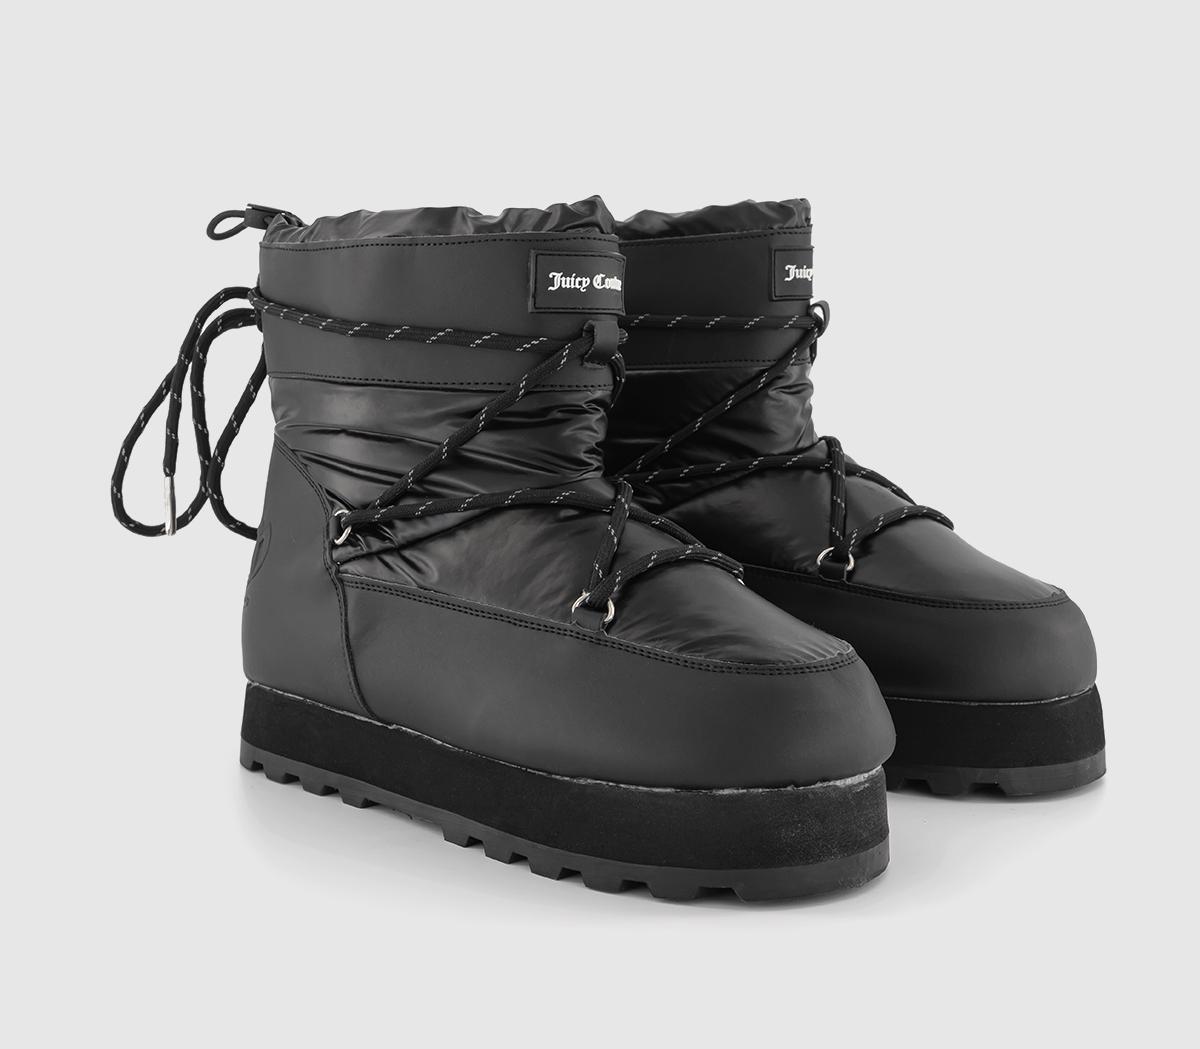 Juicy Couture Womens Mars Boots Black, 7